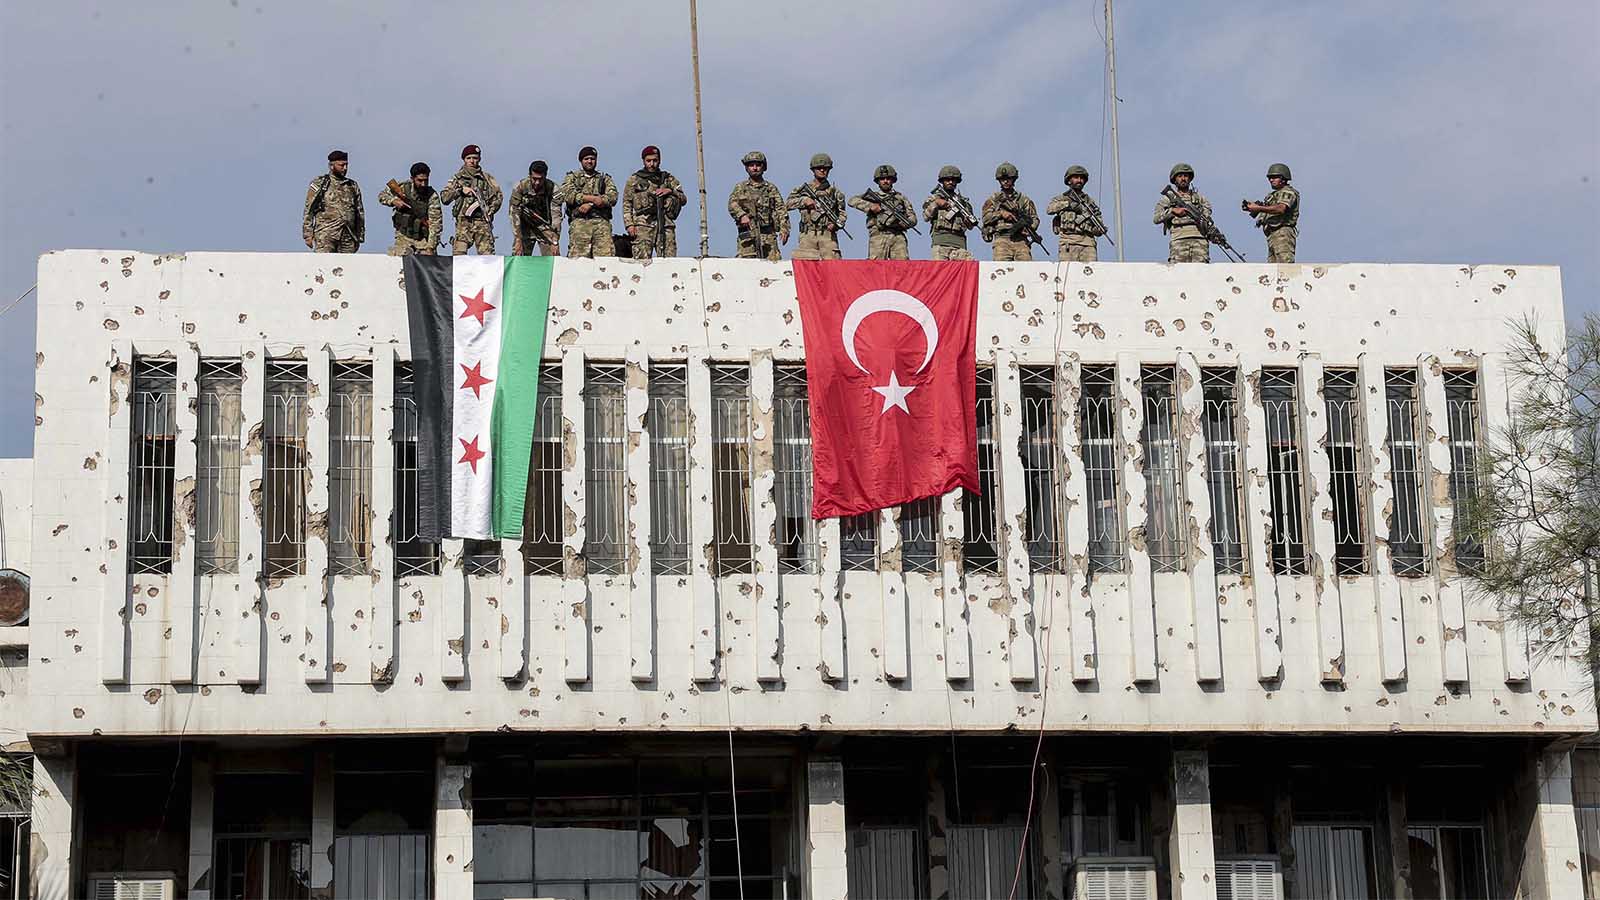 Turkish soldiers, right, and Turkey-backed opposition fighters stand atop a building next to their flags in Syrian town of Ras al Ayn, northeastern Syria, Wednesday, Oct. 23, 2019. Turkish media reports say Turkish troops and their allied Syrian opposition forces are securing a town in northeast Syria after Syrian Kurdish fighters pulled out of the area.(Ugur Can/DHA via AP)